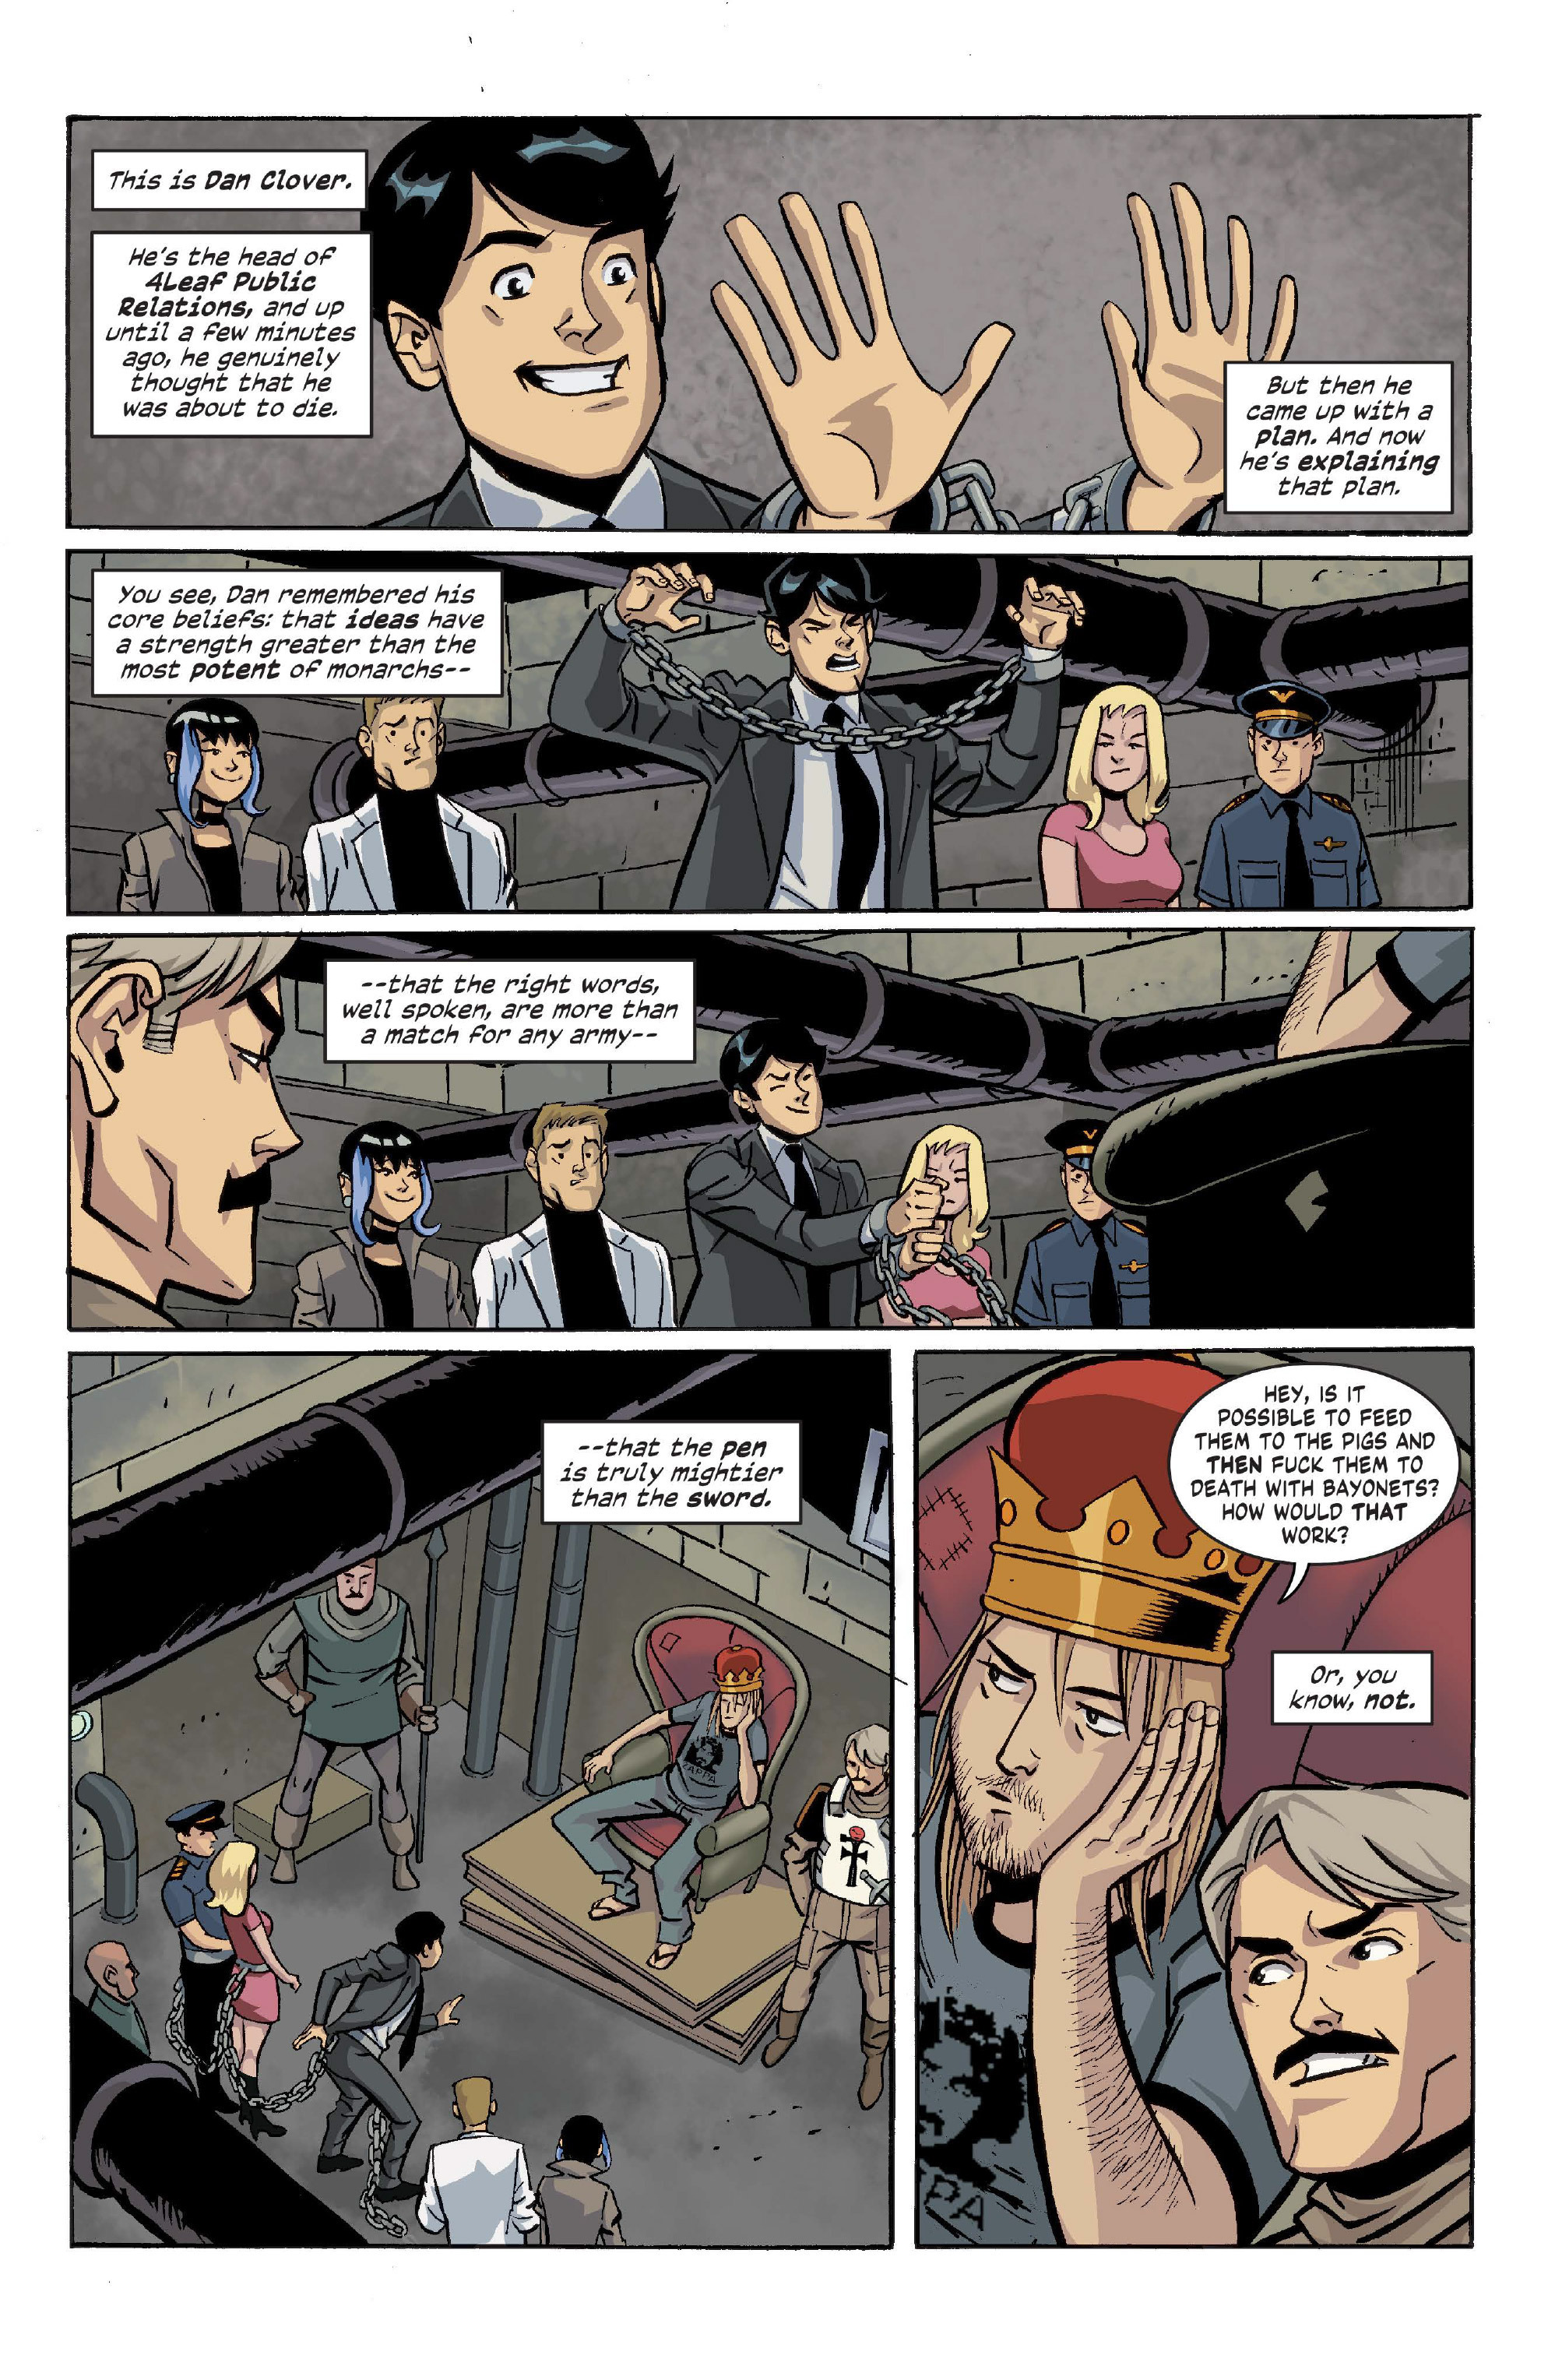 Public Relations (2015-): Chapter 3 - Page 2